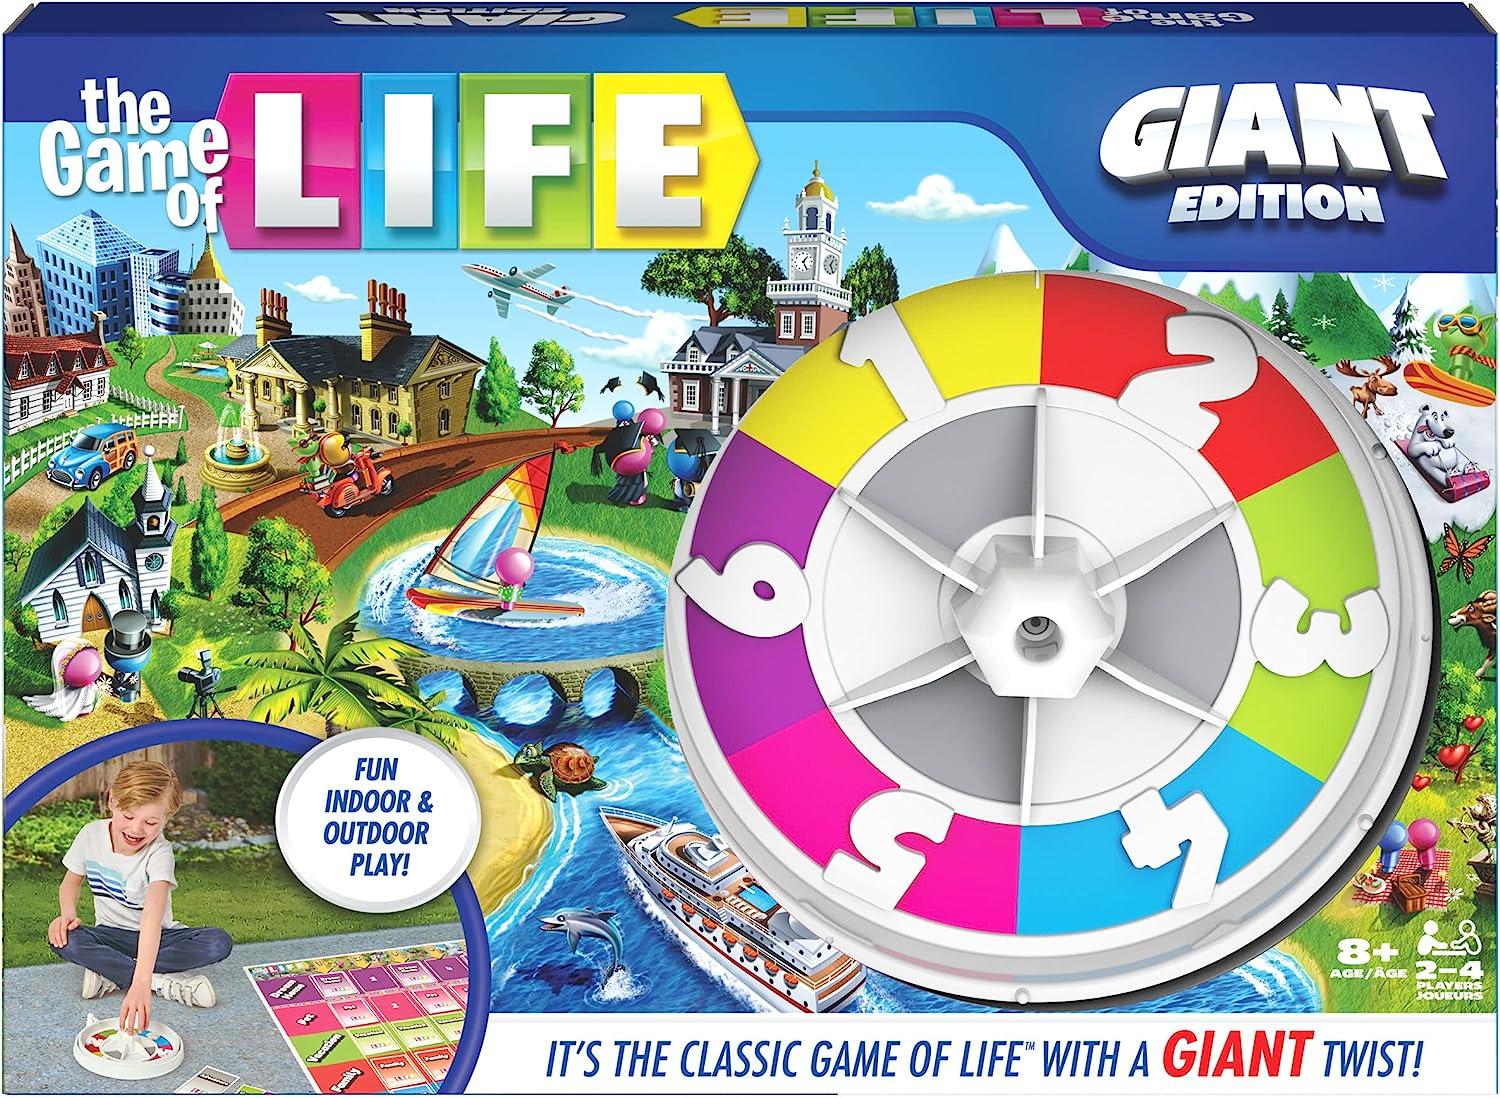 The Game of Life: Giant Edition Family Board Game for $7.29